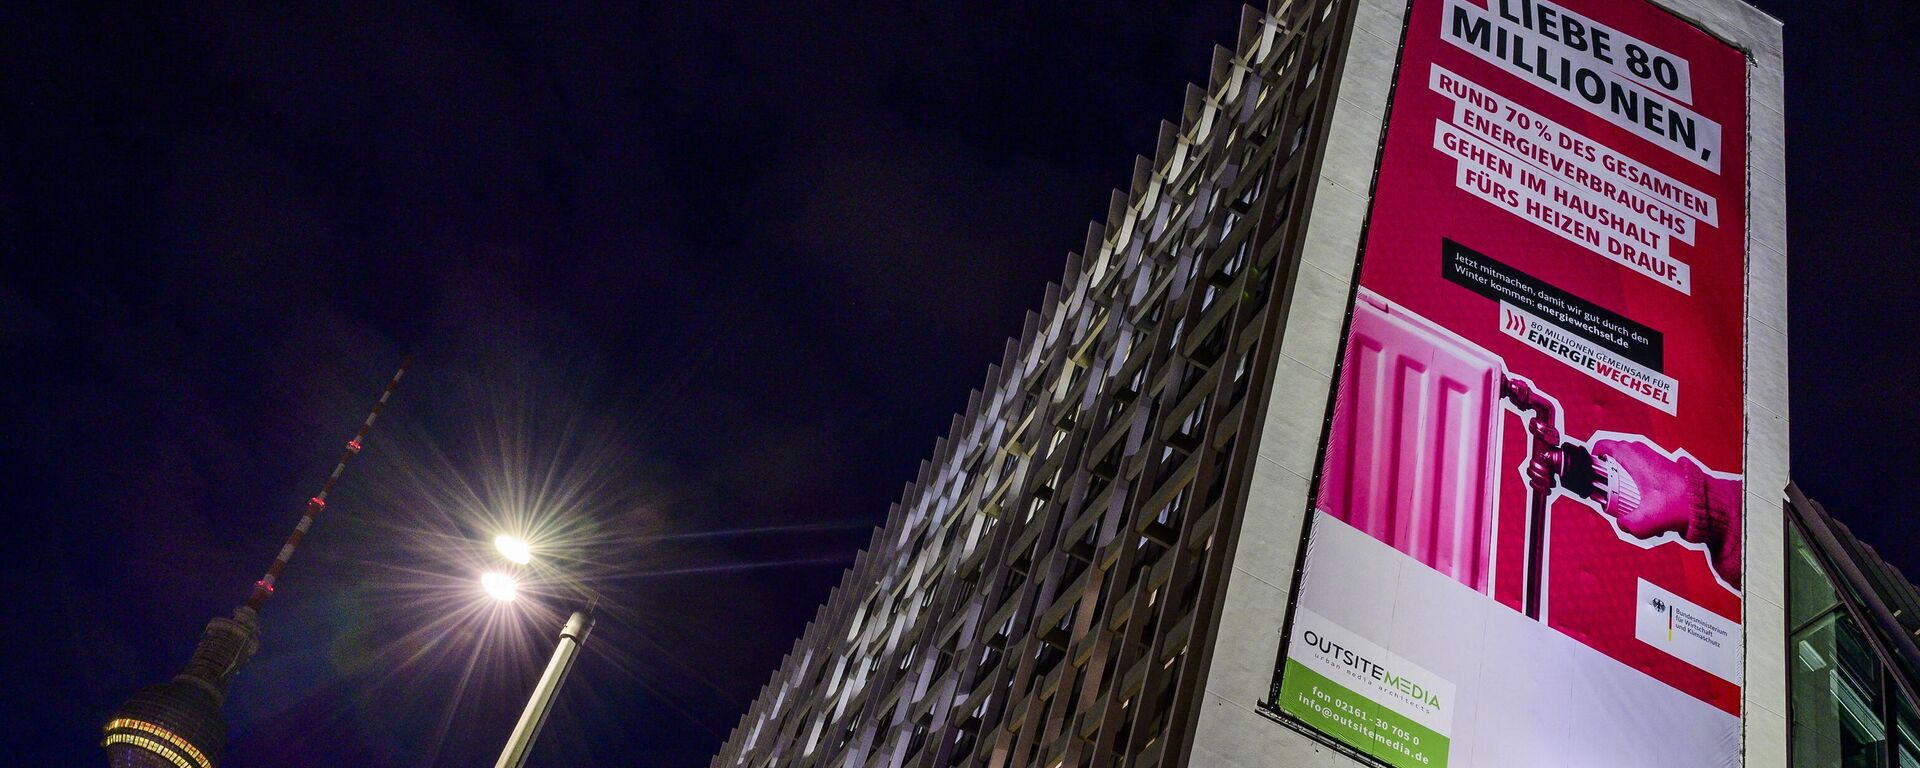 A giant billboard urging Germany's population to bring down energy consumption by lowering temperatures at home is seen on a building near the TV Tower in Berlin on November 7, 2022 - Sputnik International, 1920, 26.11.2022